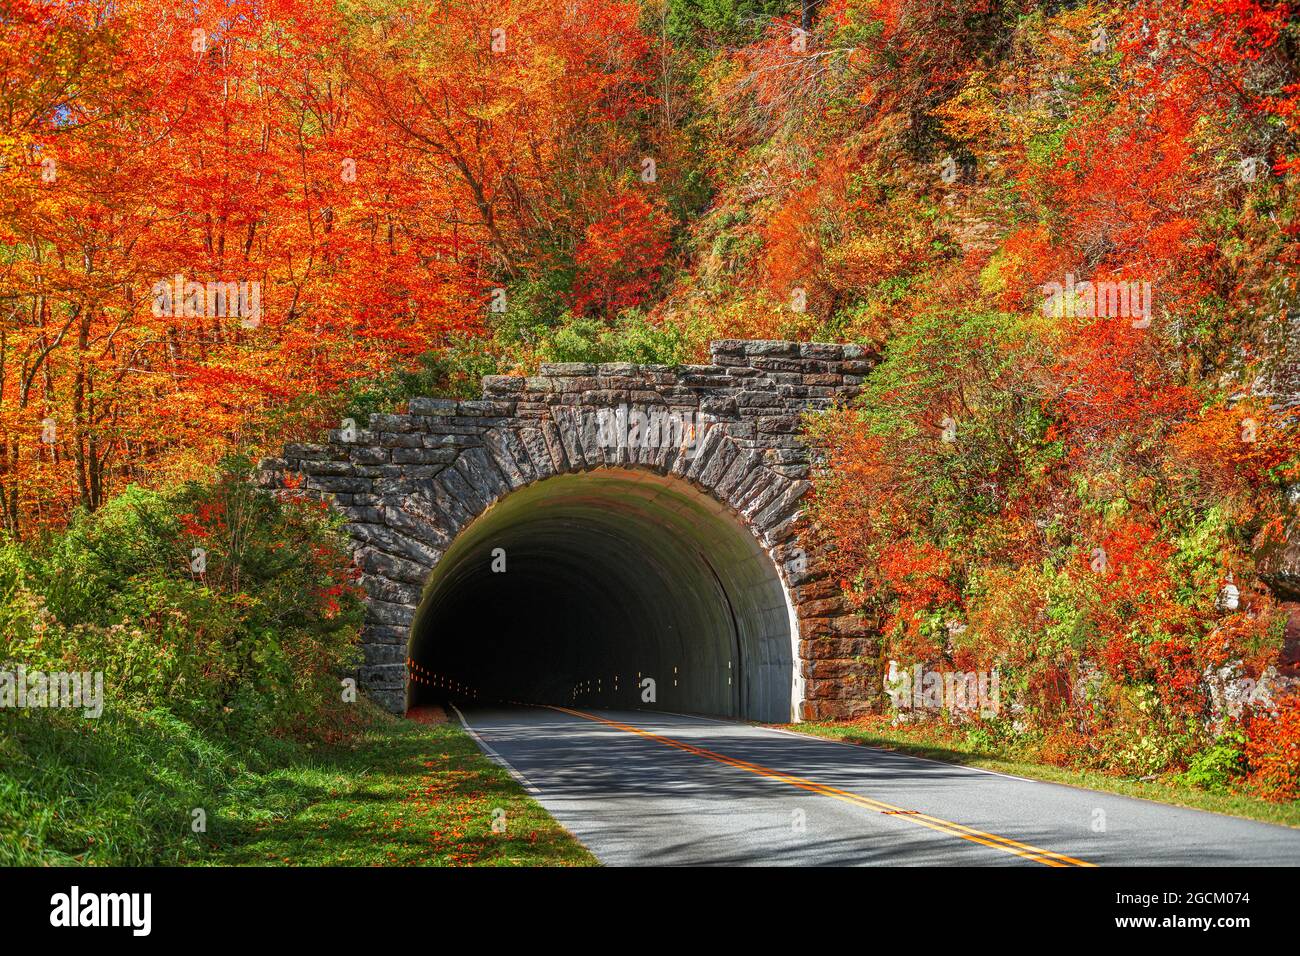 Blue Ridge Parkway Tunnel in Pisgah National Forest, NC, USA. Stockfoto